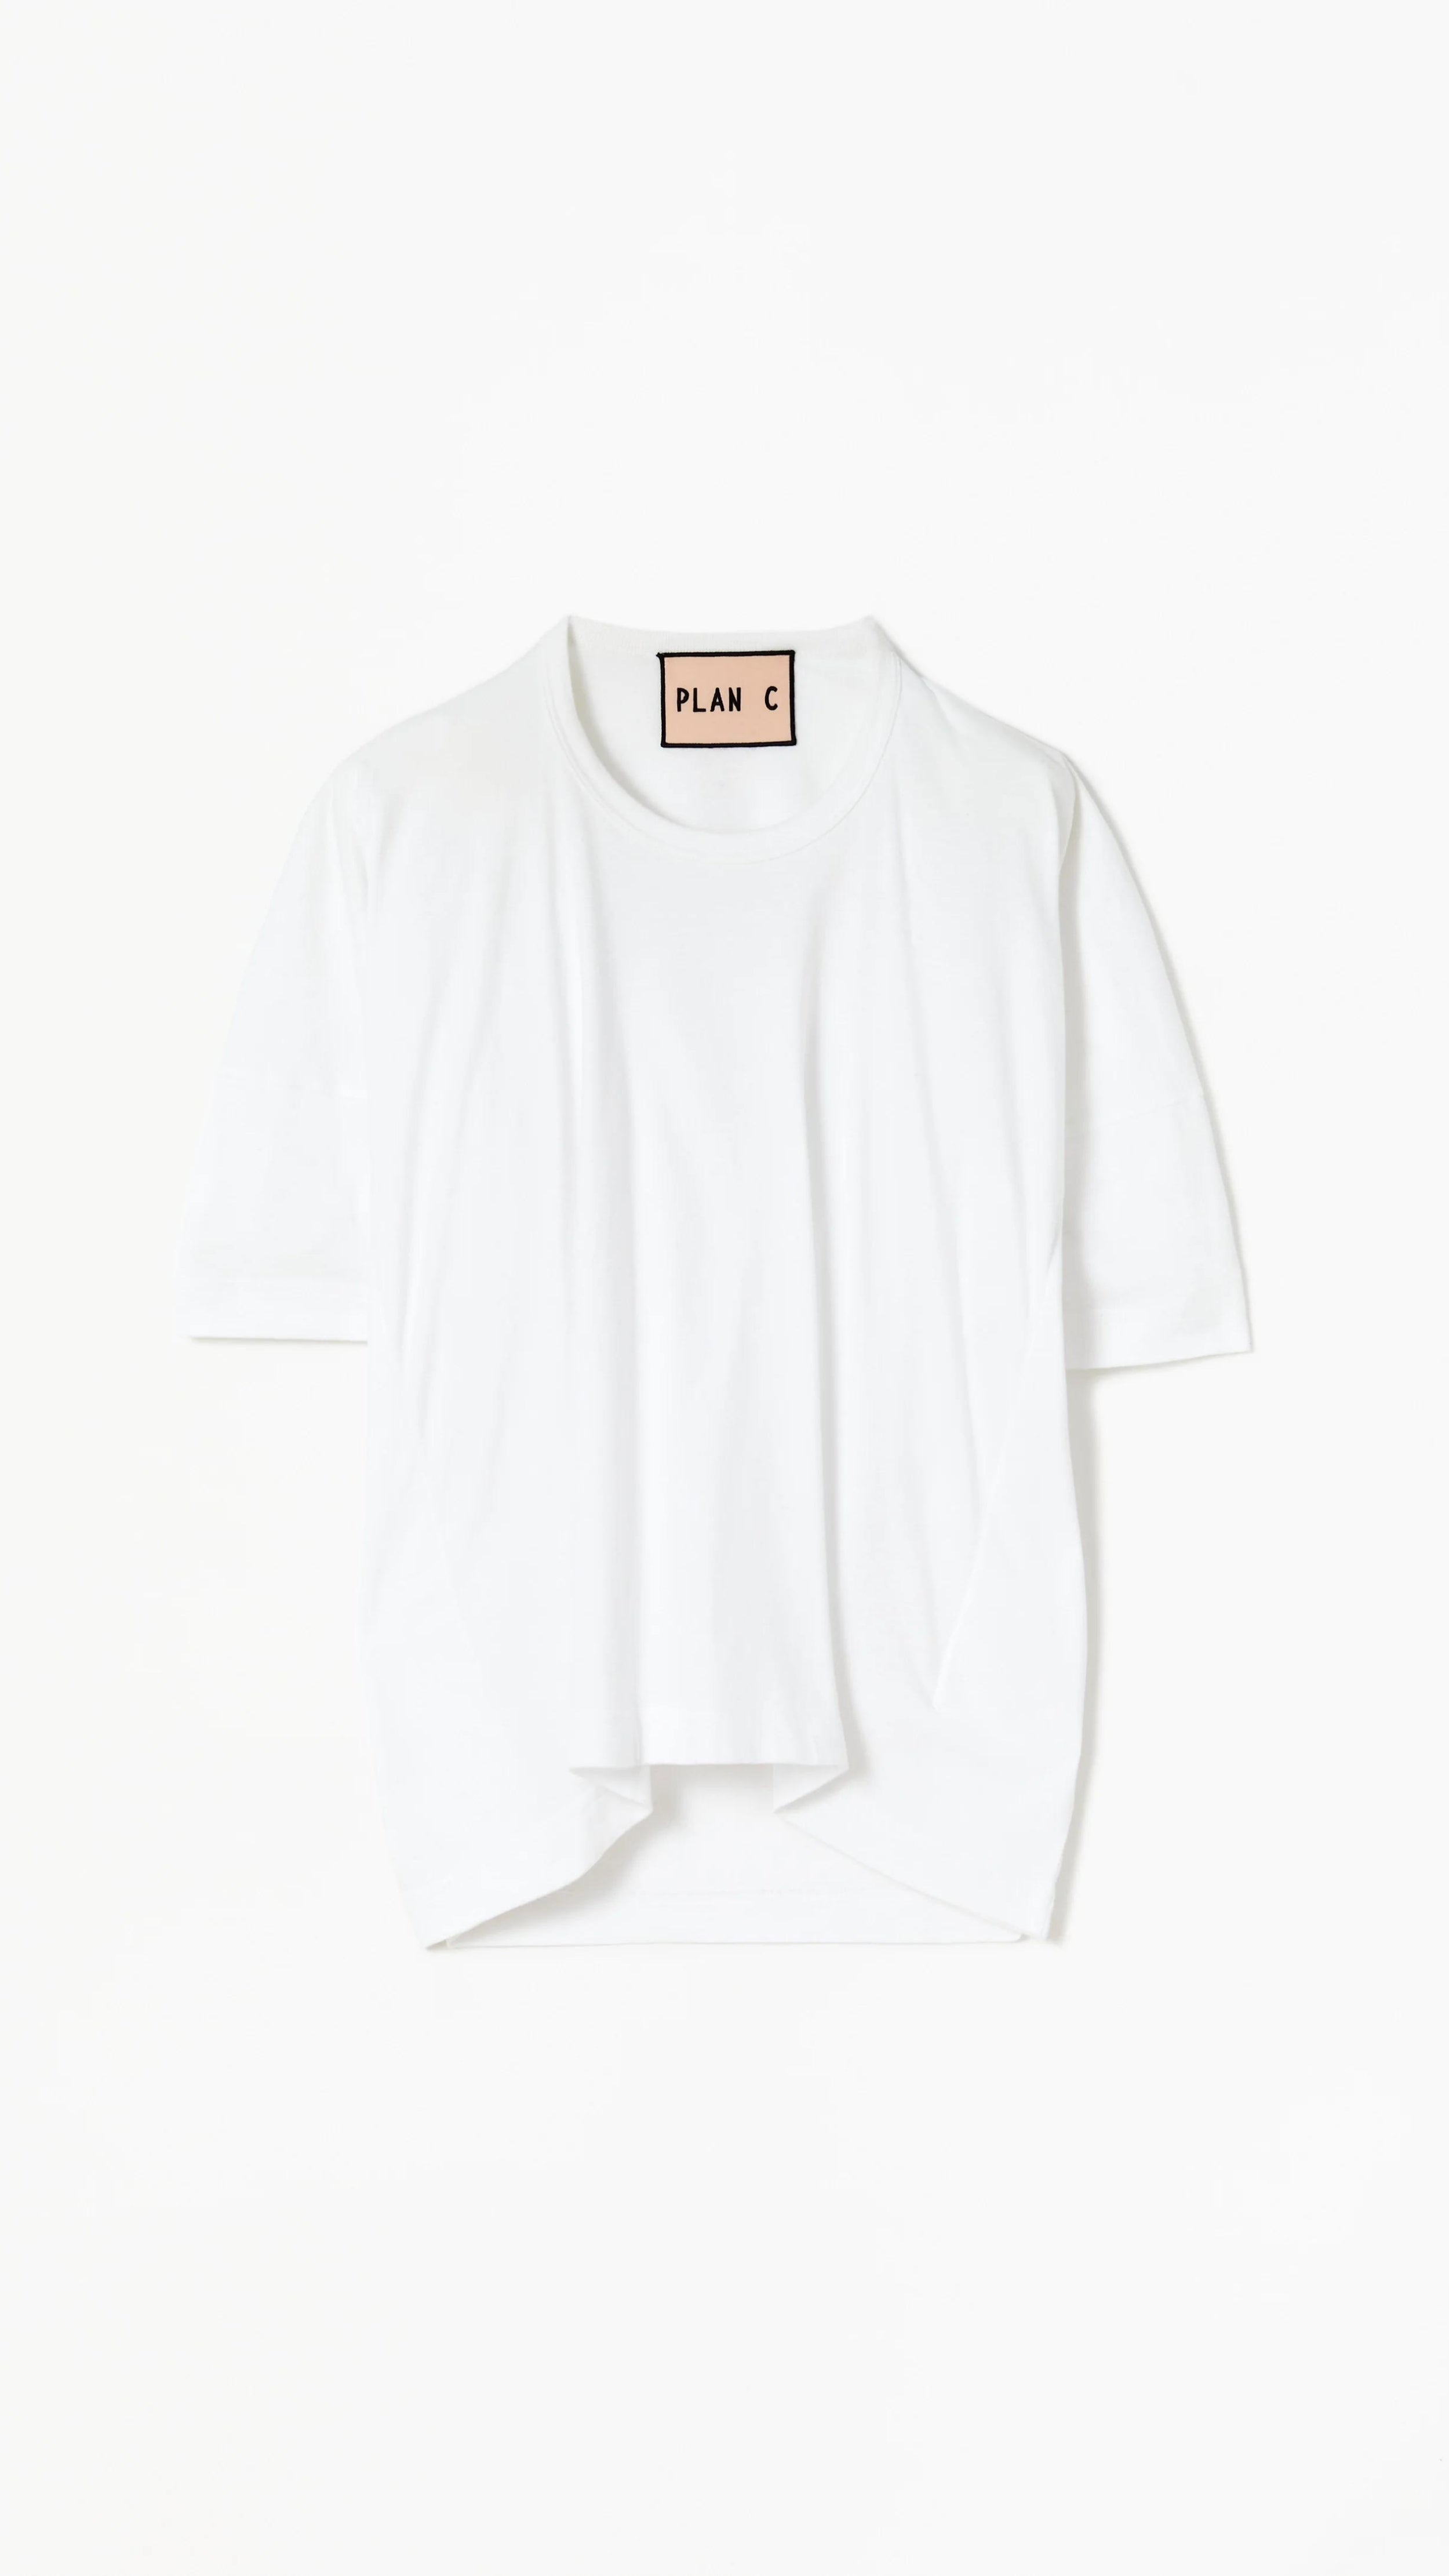 Plan C Draped Back White Cotton Tee 100% cotton, classic white tee with an updated modern draped back. The iconic Bianca patch in bold red adds a discreet accent at the back neckline. Flat product photo.